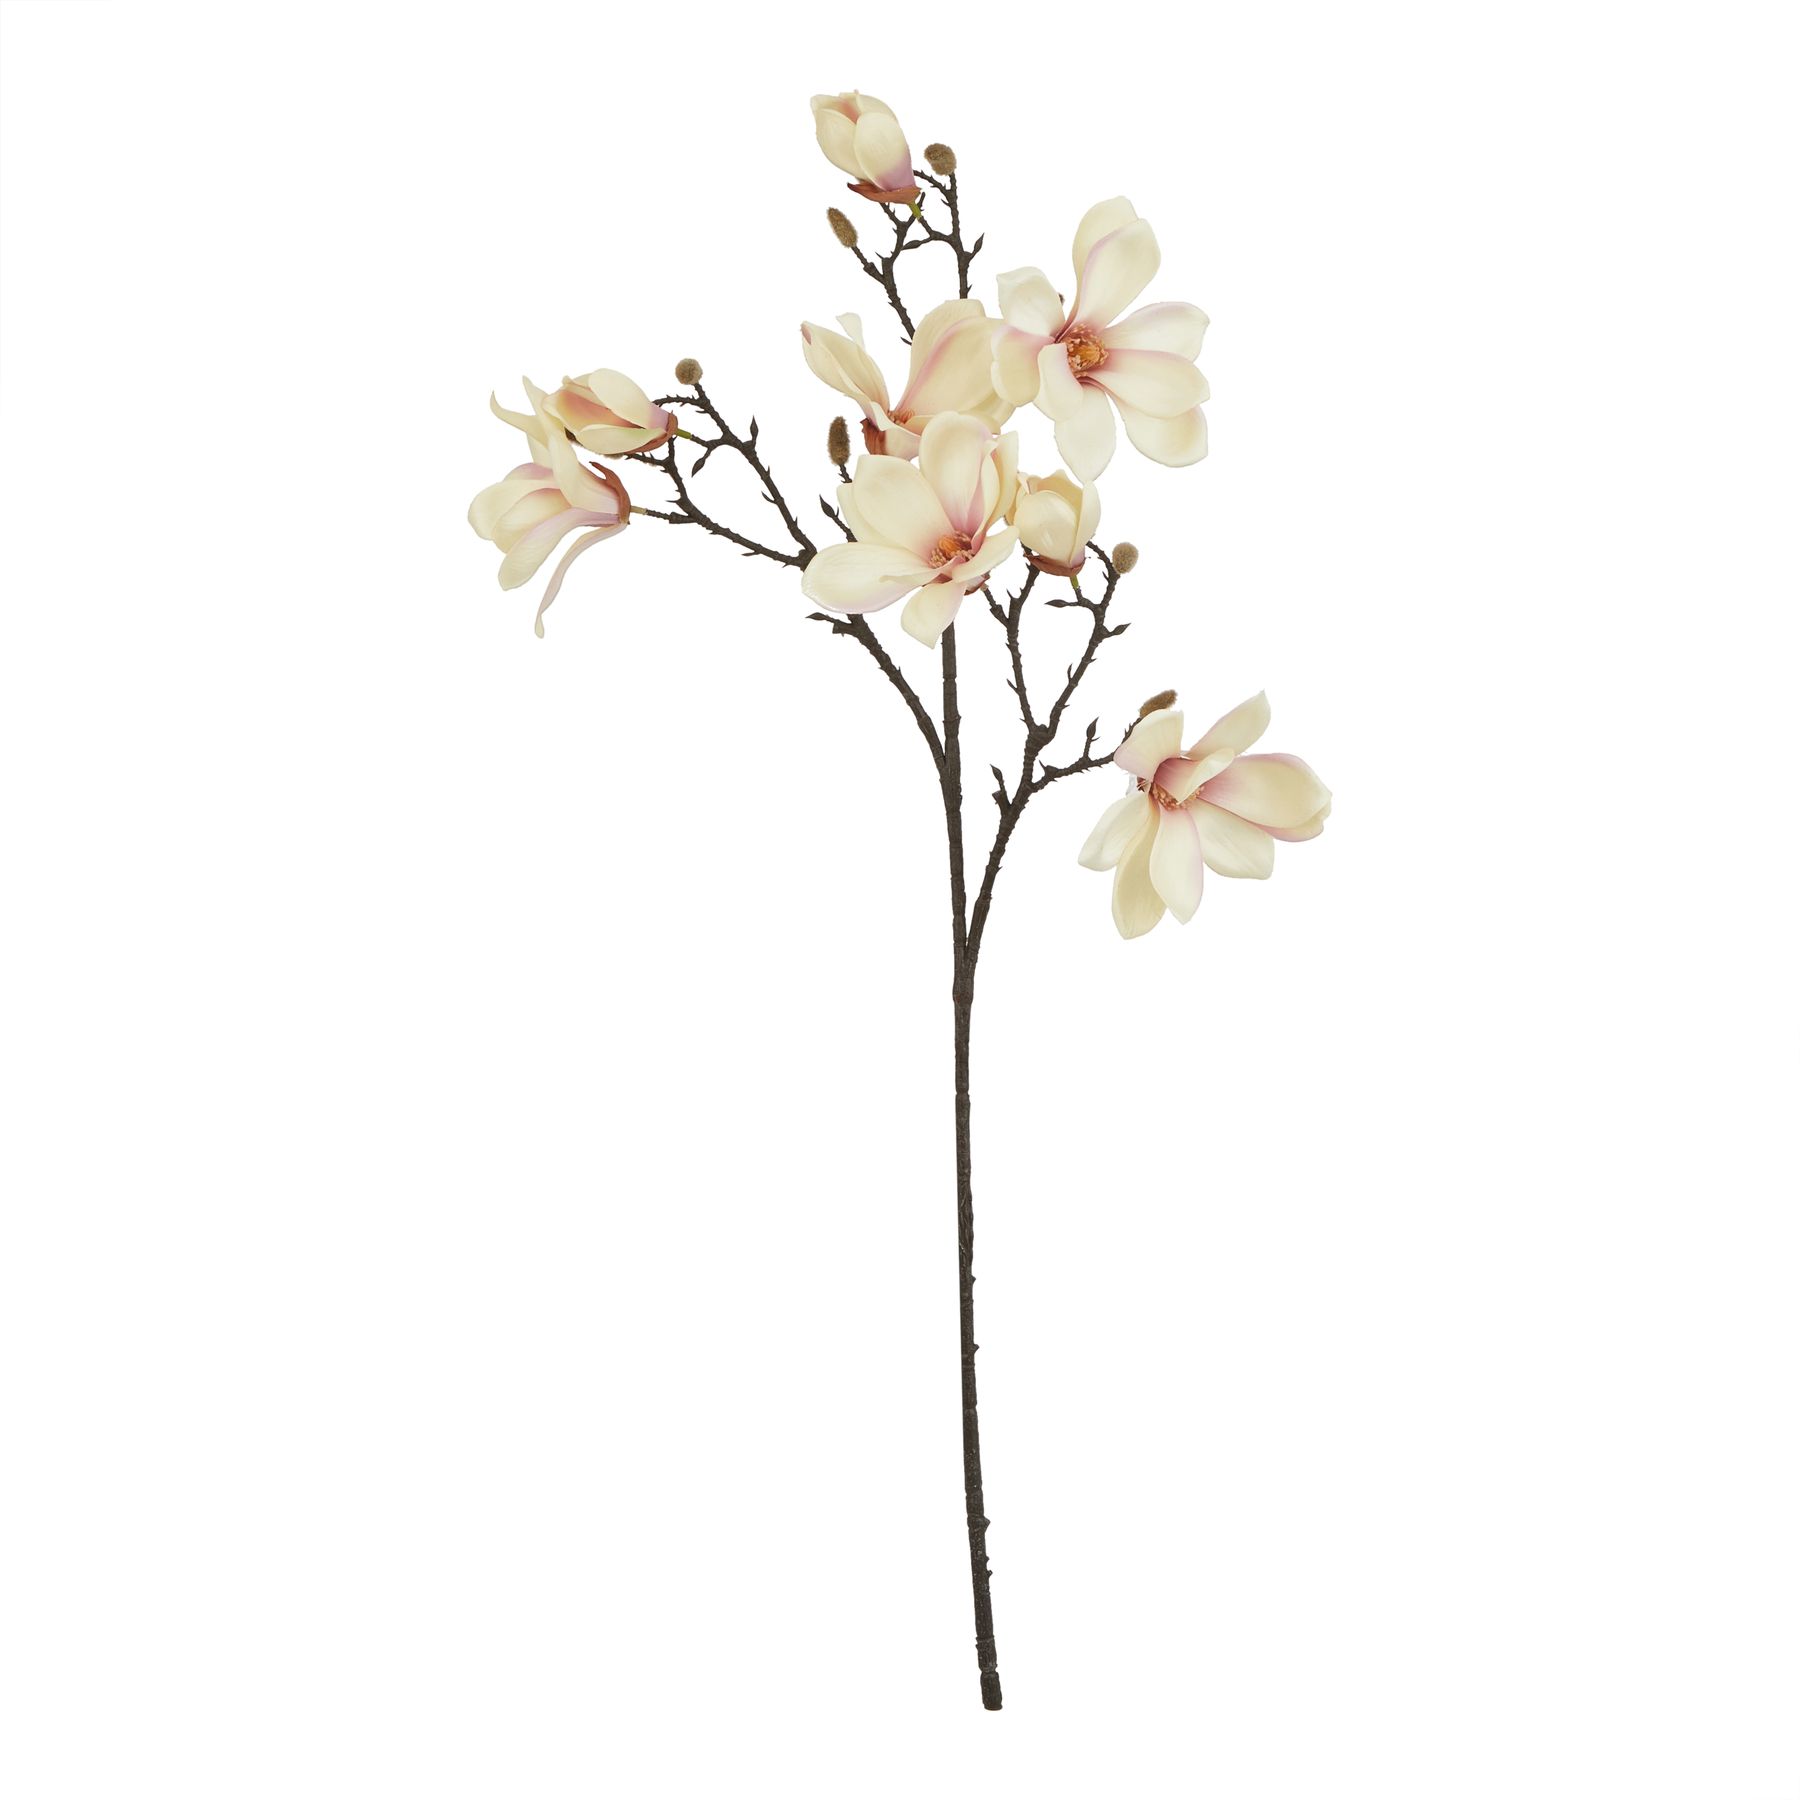 The Natural Garden Collection Pale Apricot Magnolia Stem - Image 1